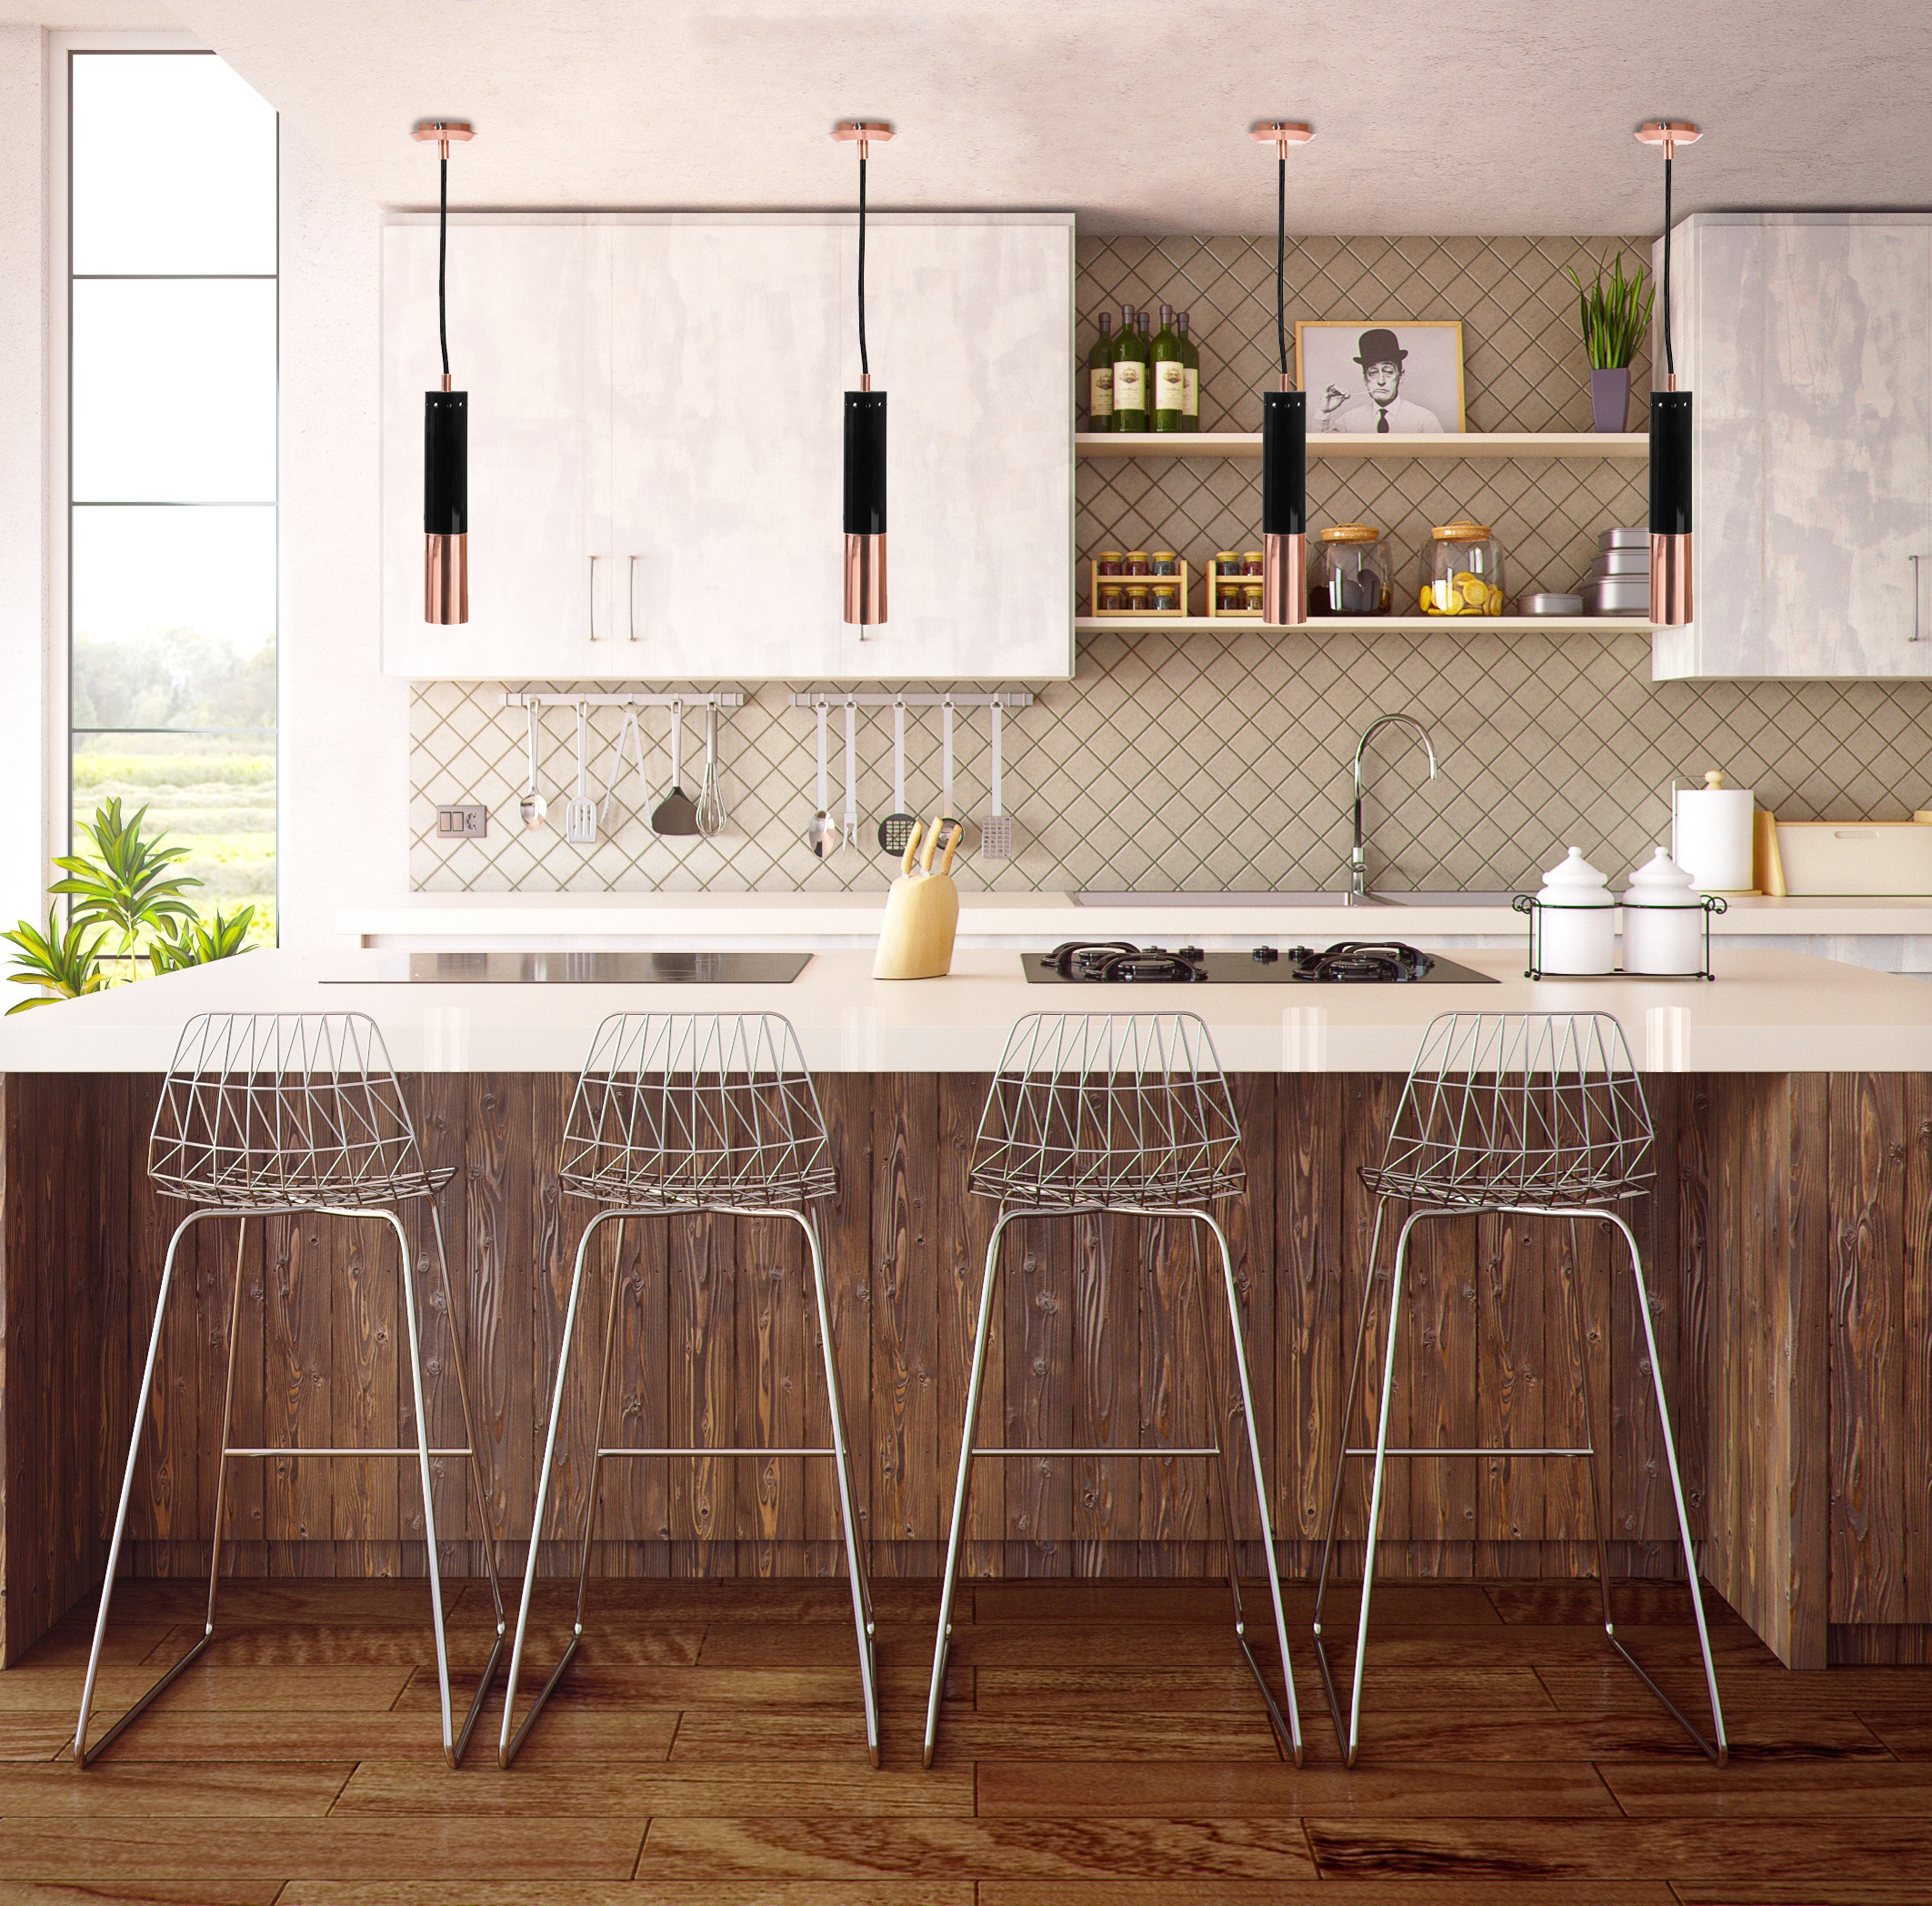 10 Gorgeous Kitchen Design Ideas to Help You Create the Space of Your Dreams!